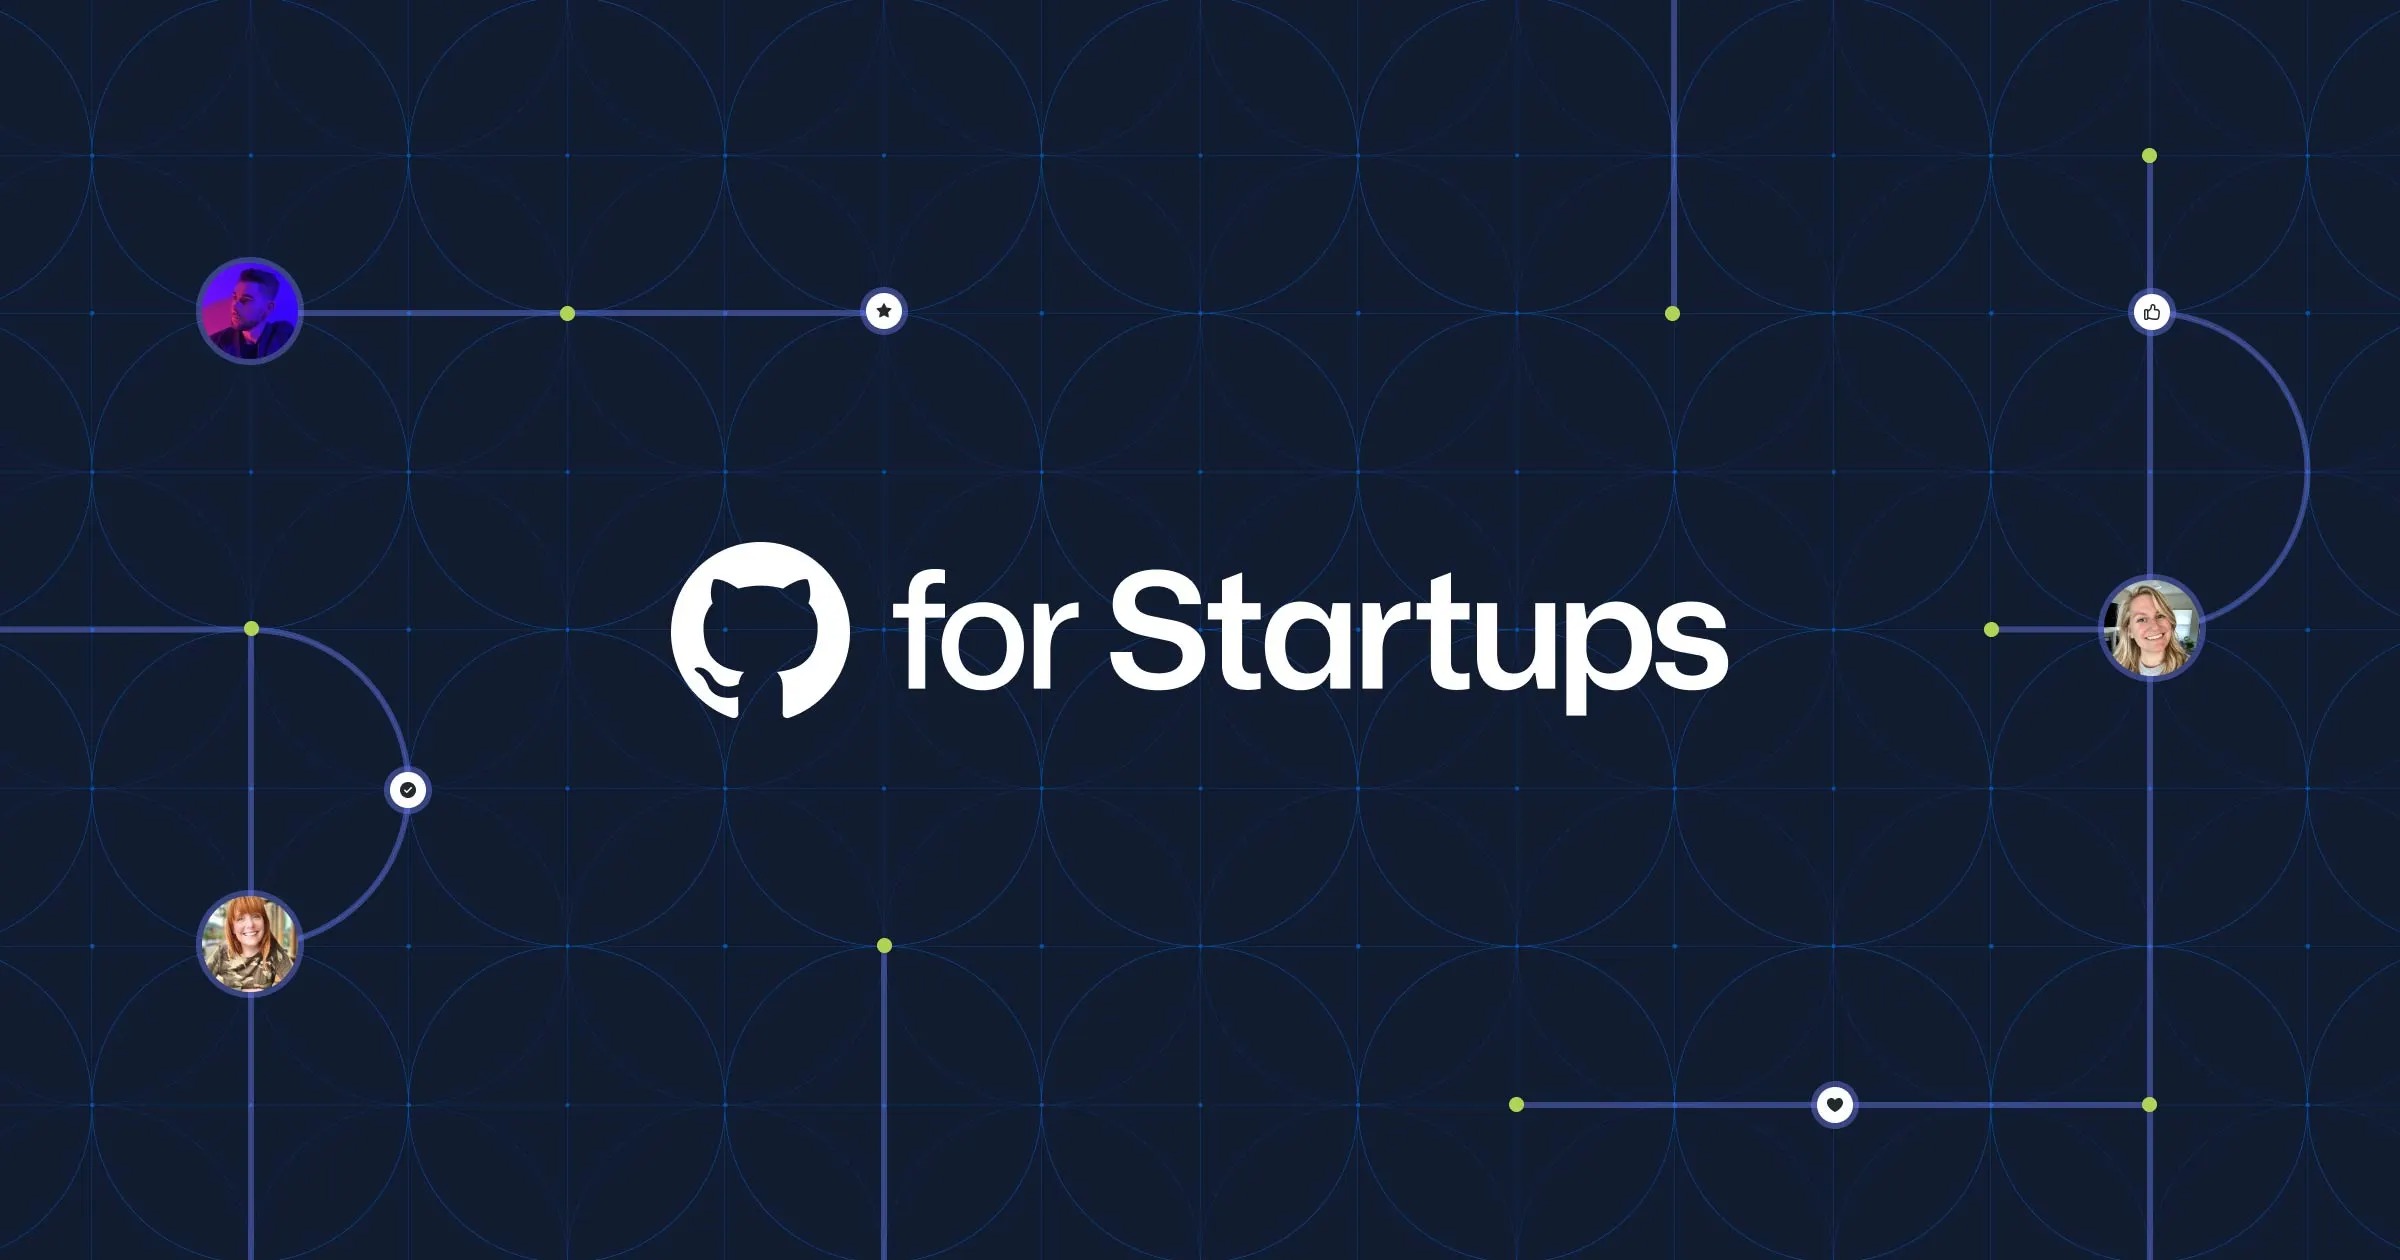 GitHub for Startups is generally available